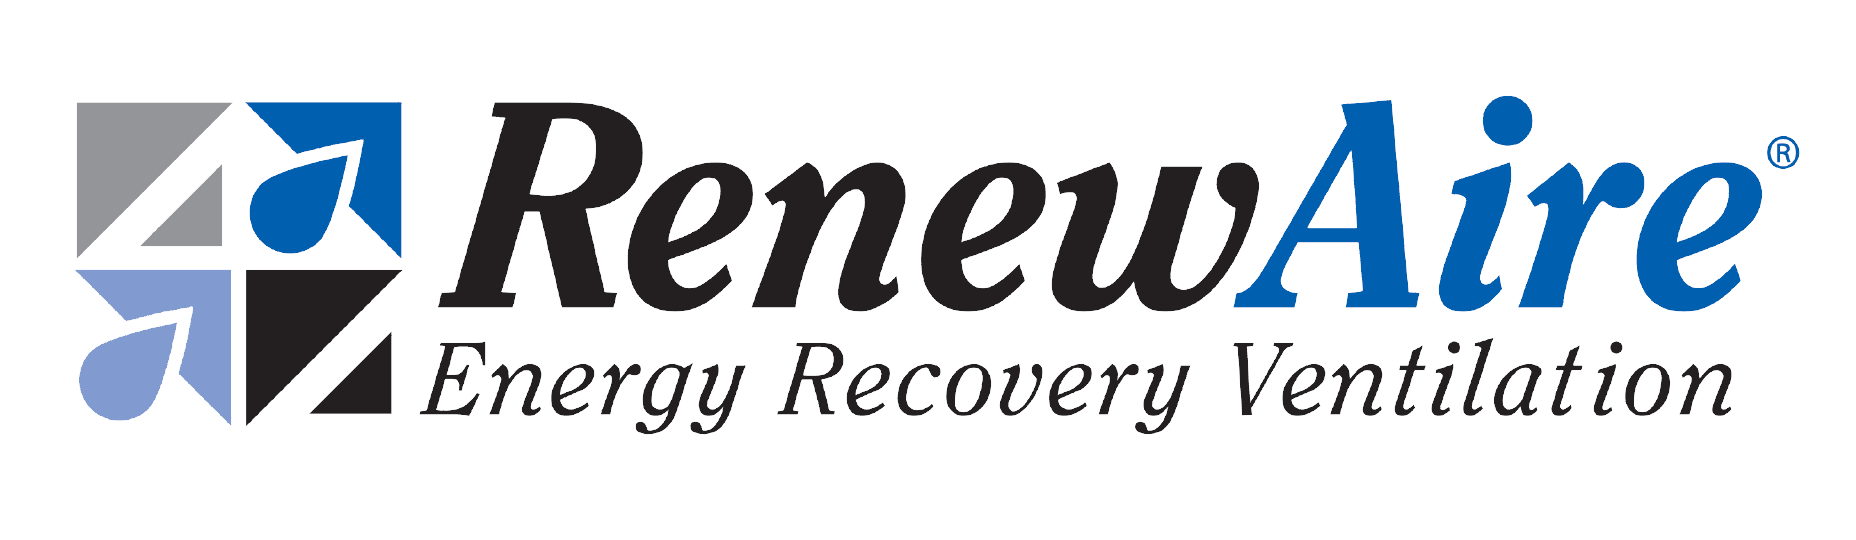 RenewAire Energy Recovery Ventilation